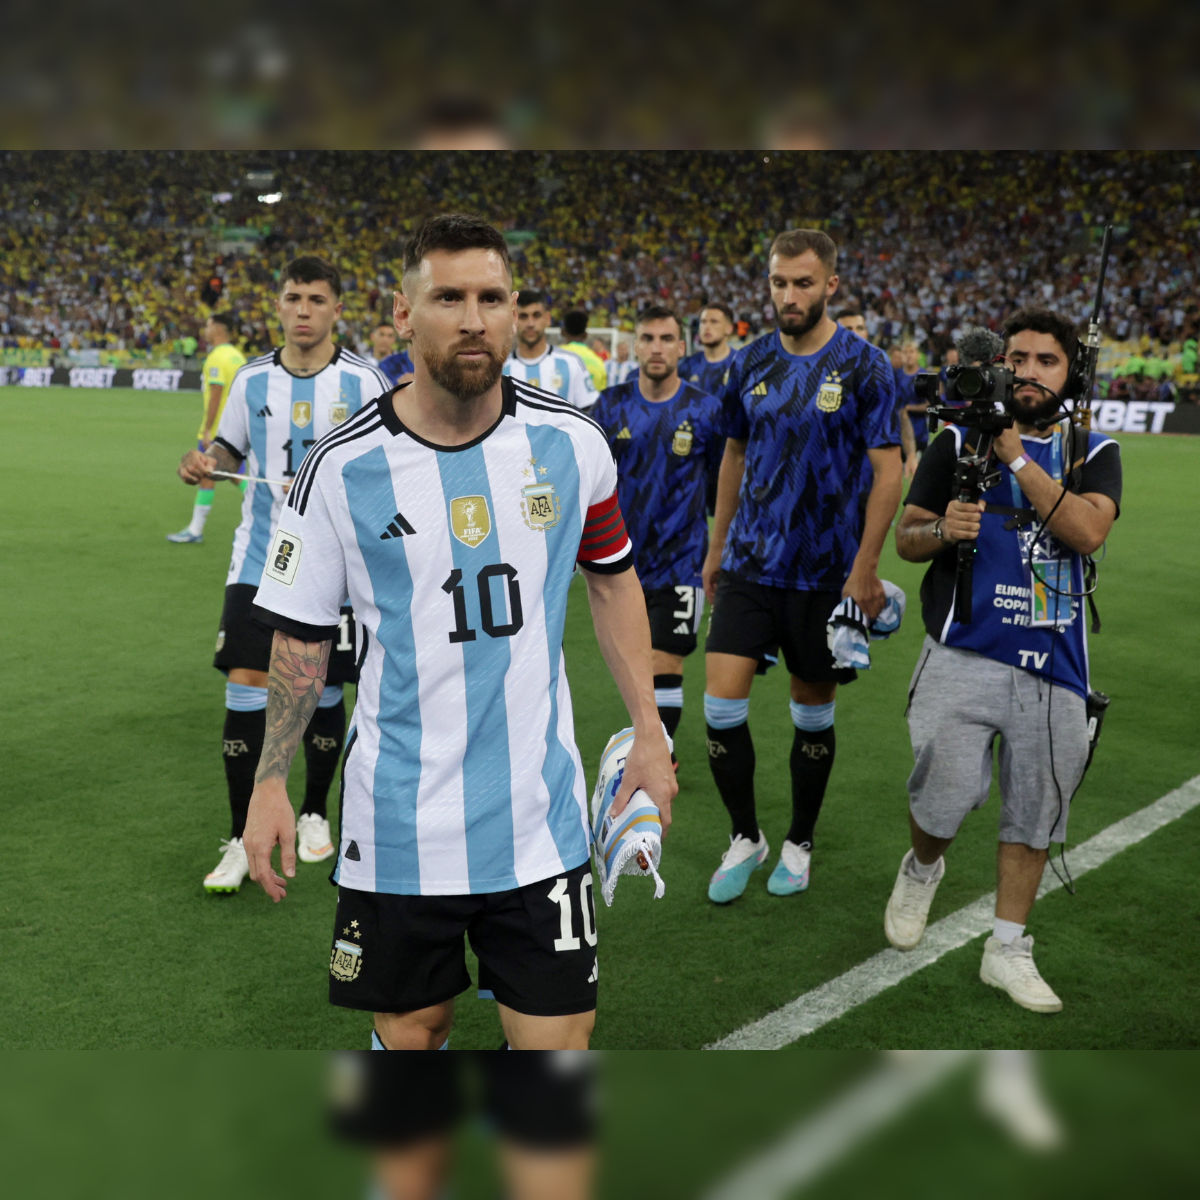 Messi walks off in protest, Brazil vs Argentina delayed as fans